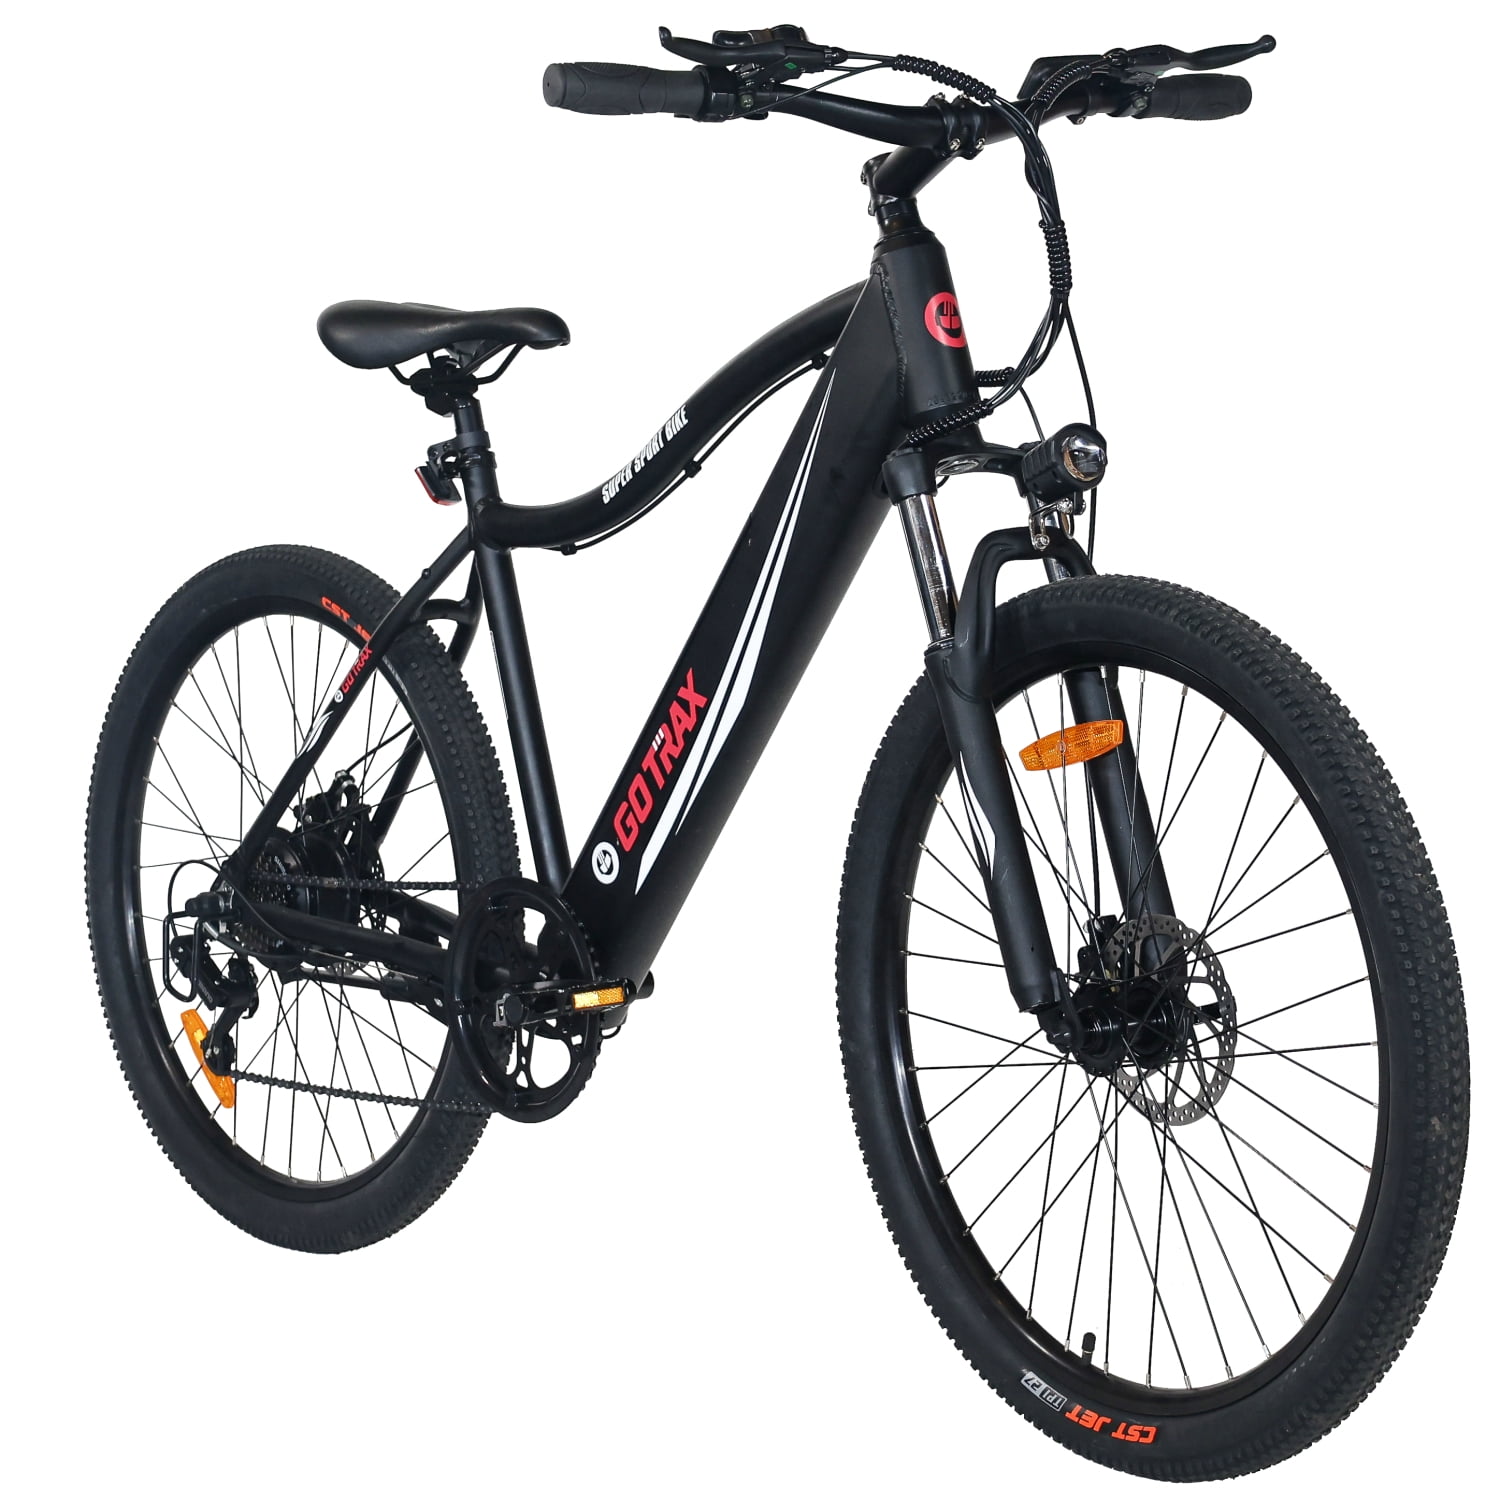 350W Powerful Motor up Speed 25km/h GOTRAX EBE6 26inch Electric Bike with 48V 10Ah Removable Lithium-Ion Battery Shimano Professional 7 Speed Gears,Pre-Assembled Fenders and Rear Shelf for Snow Beach 